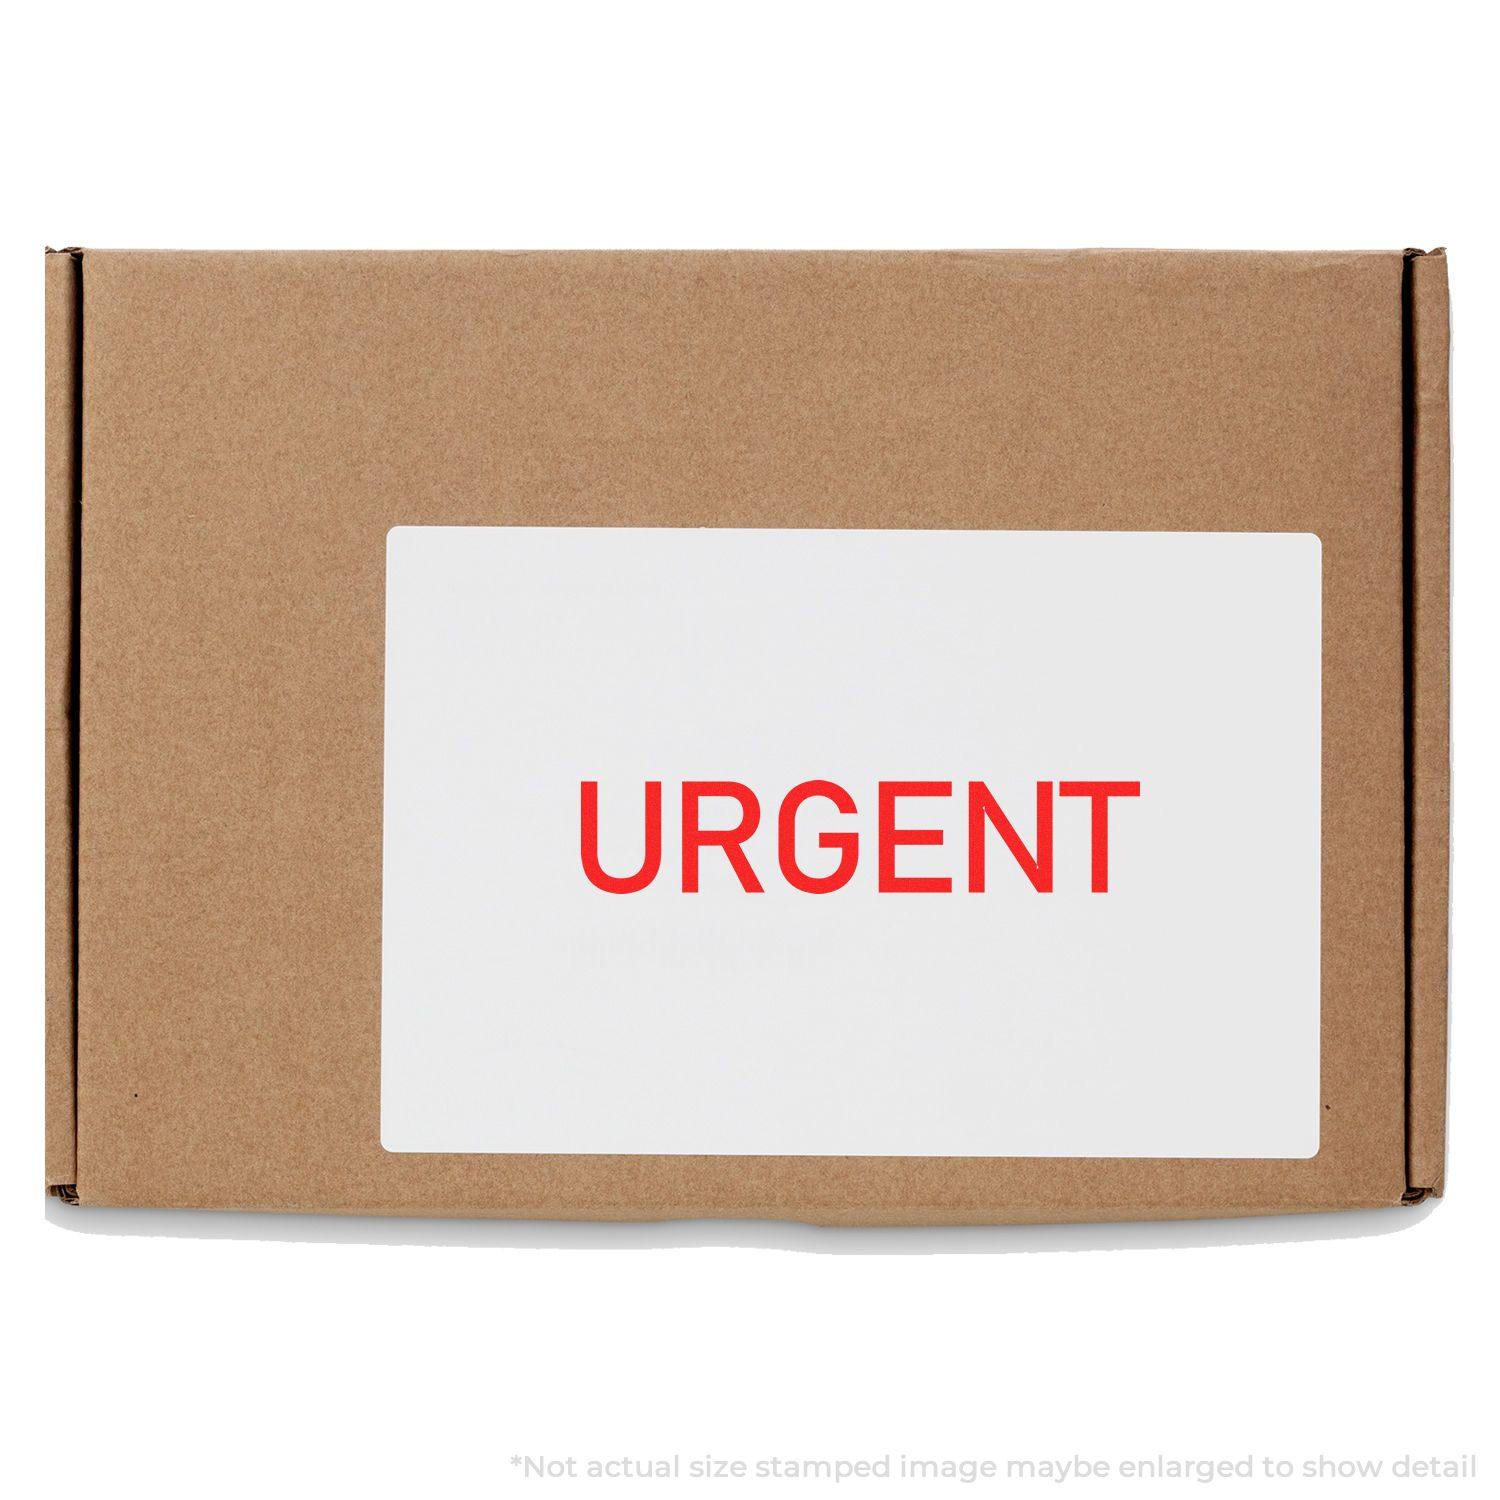 A stock office rubber stamp with a stamped image showing how the text "URGENT" in a narrow font is displayed after stamping.